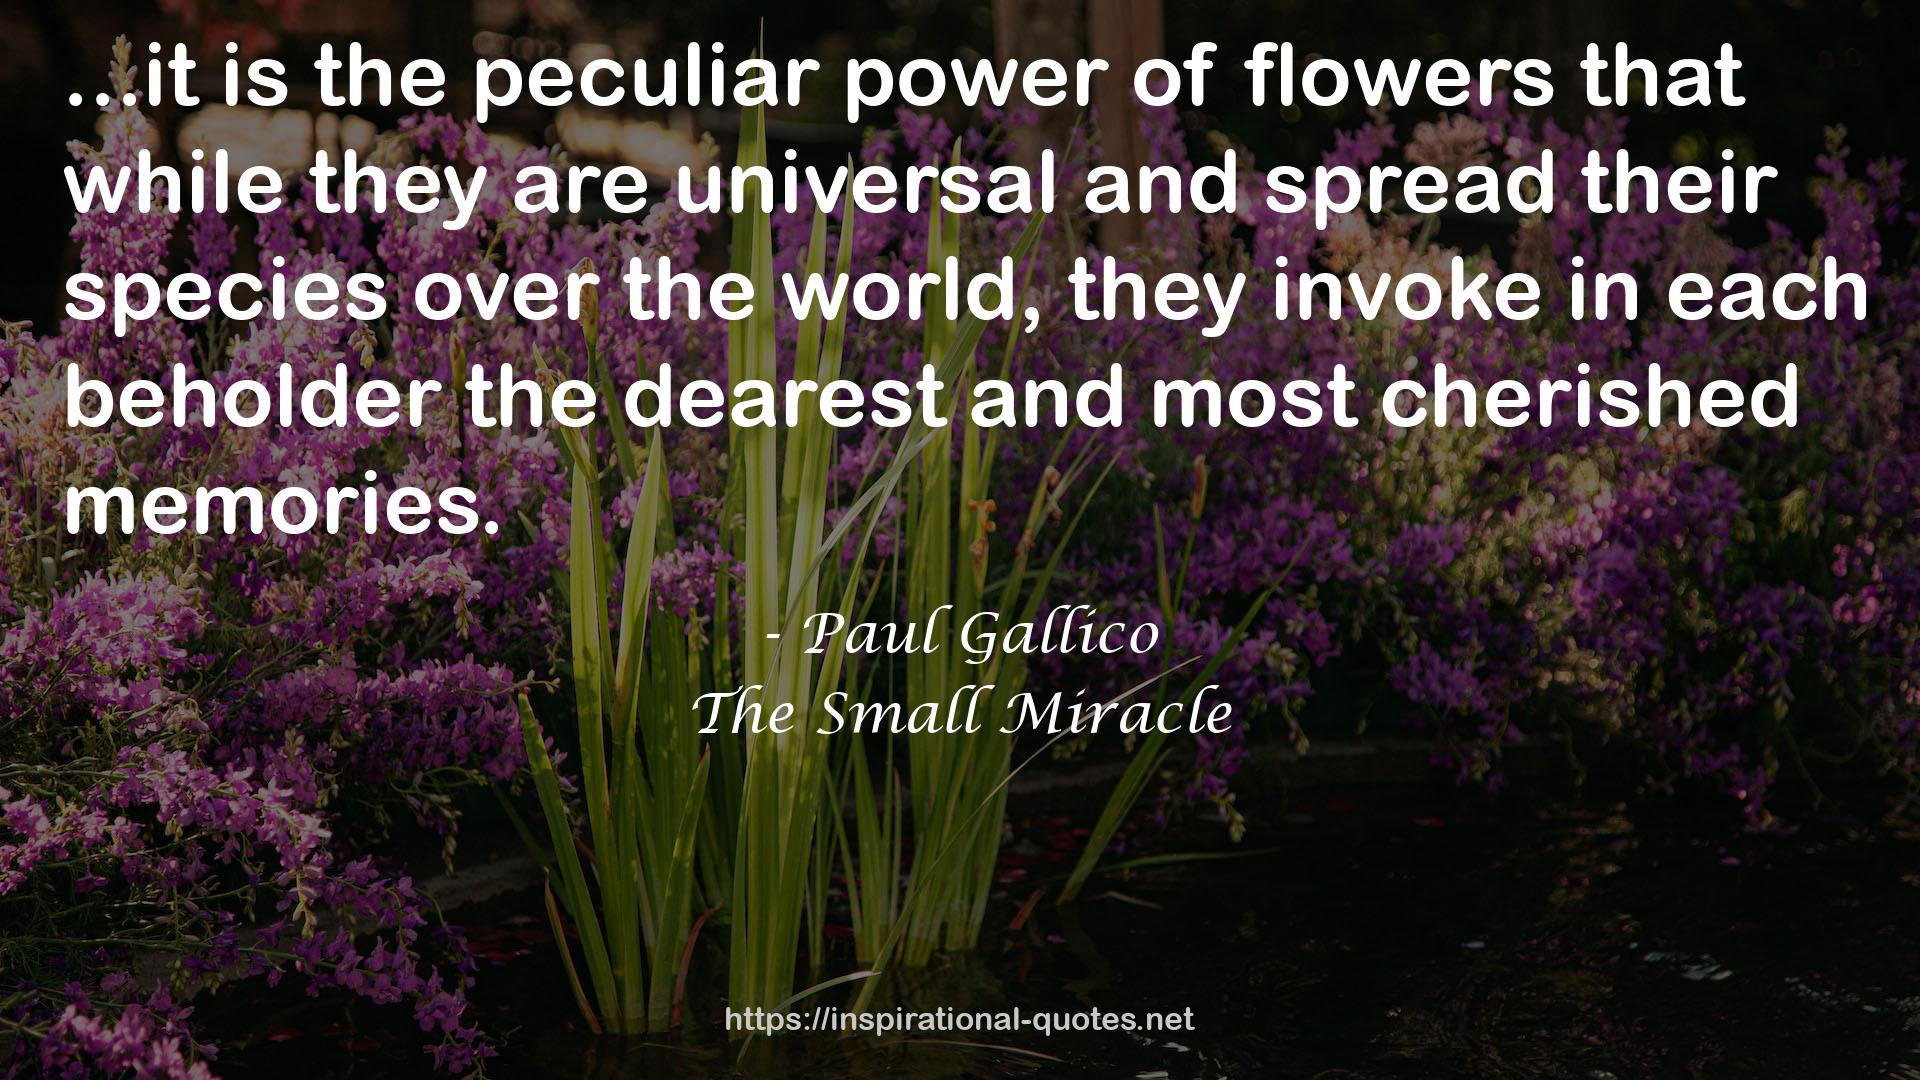 The Small Miracle QUOTES